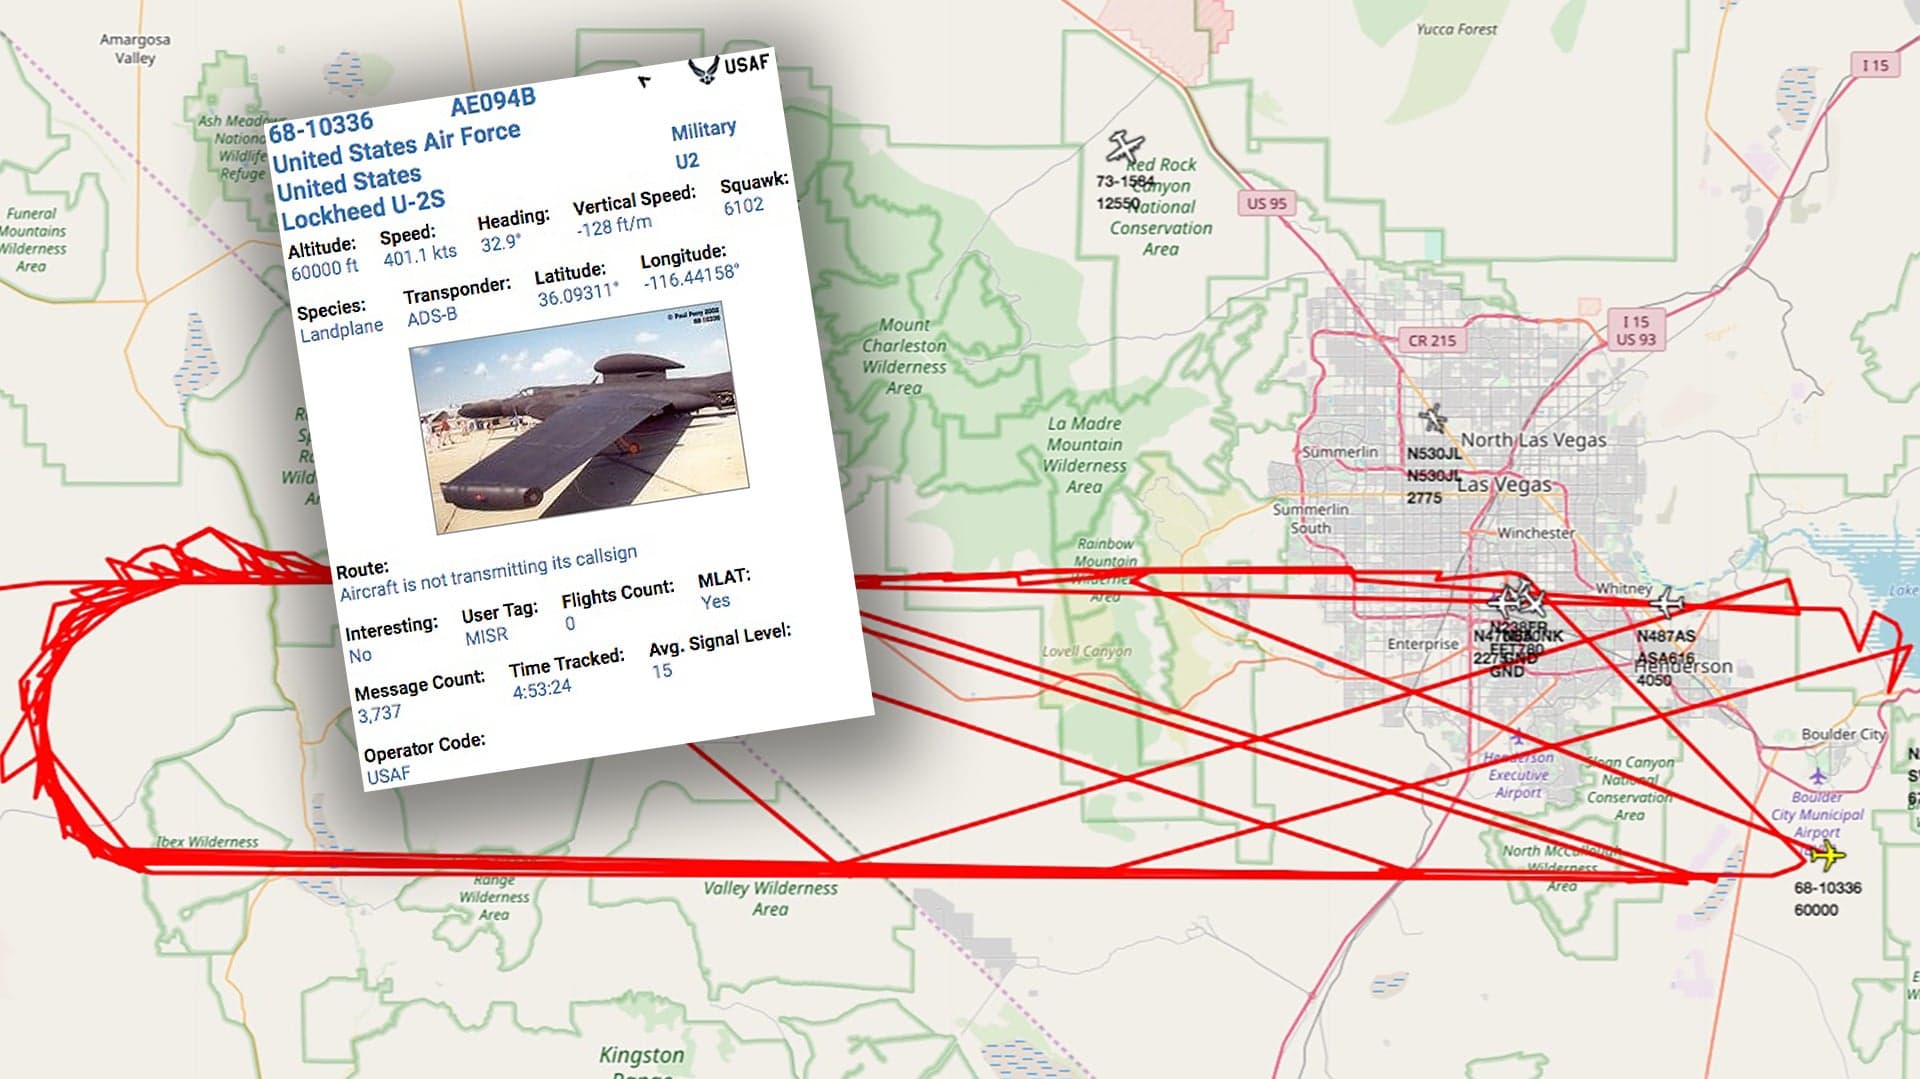 A U-2 Spy Plane Is Flying Peculiar Tracks High Over South Las Vegas (Updated)